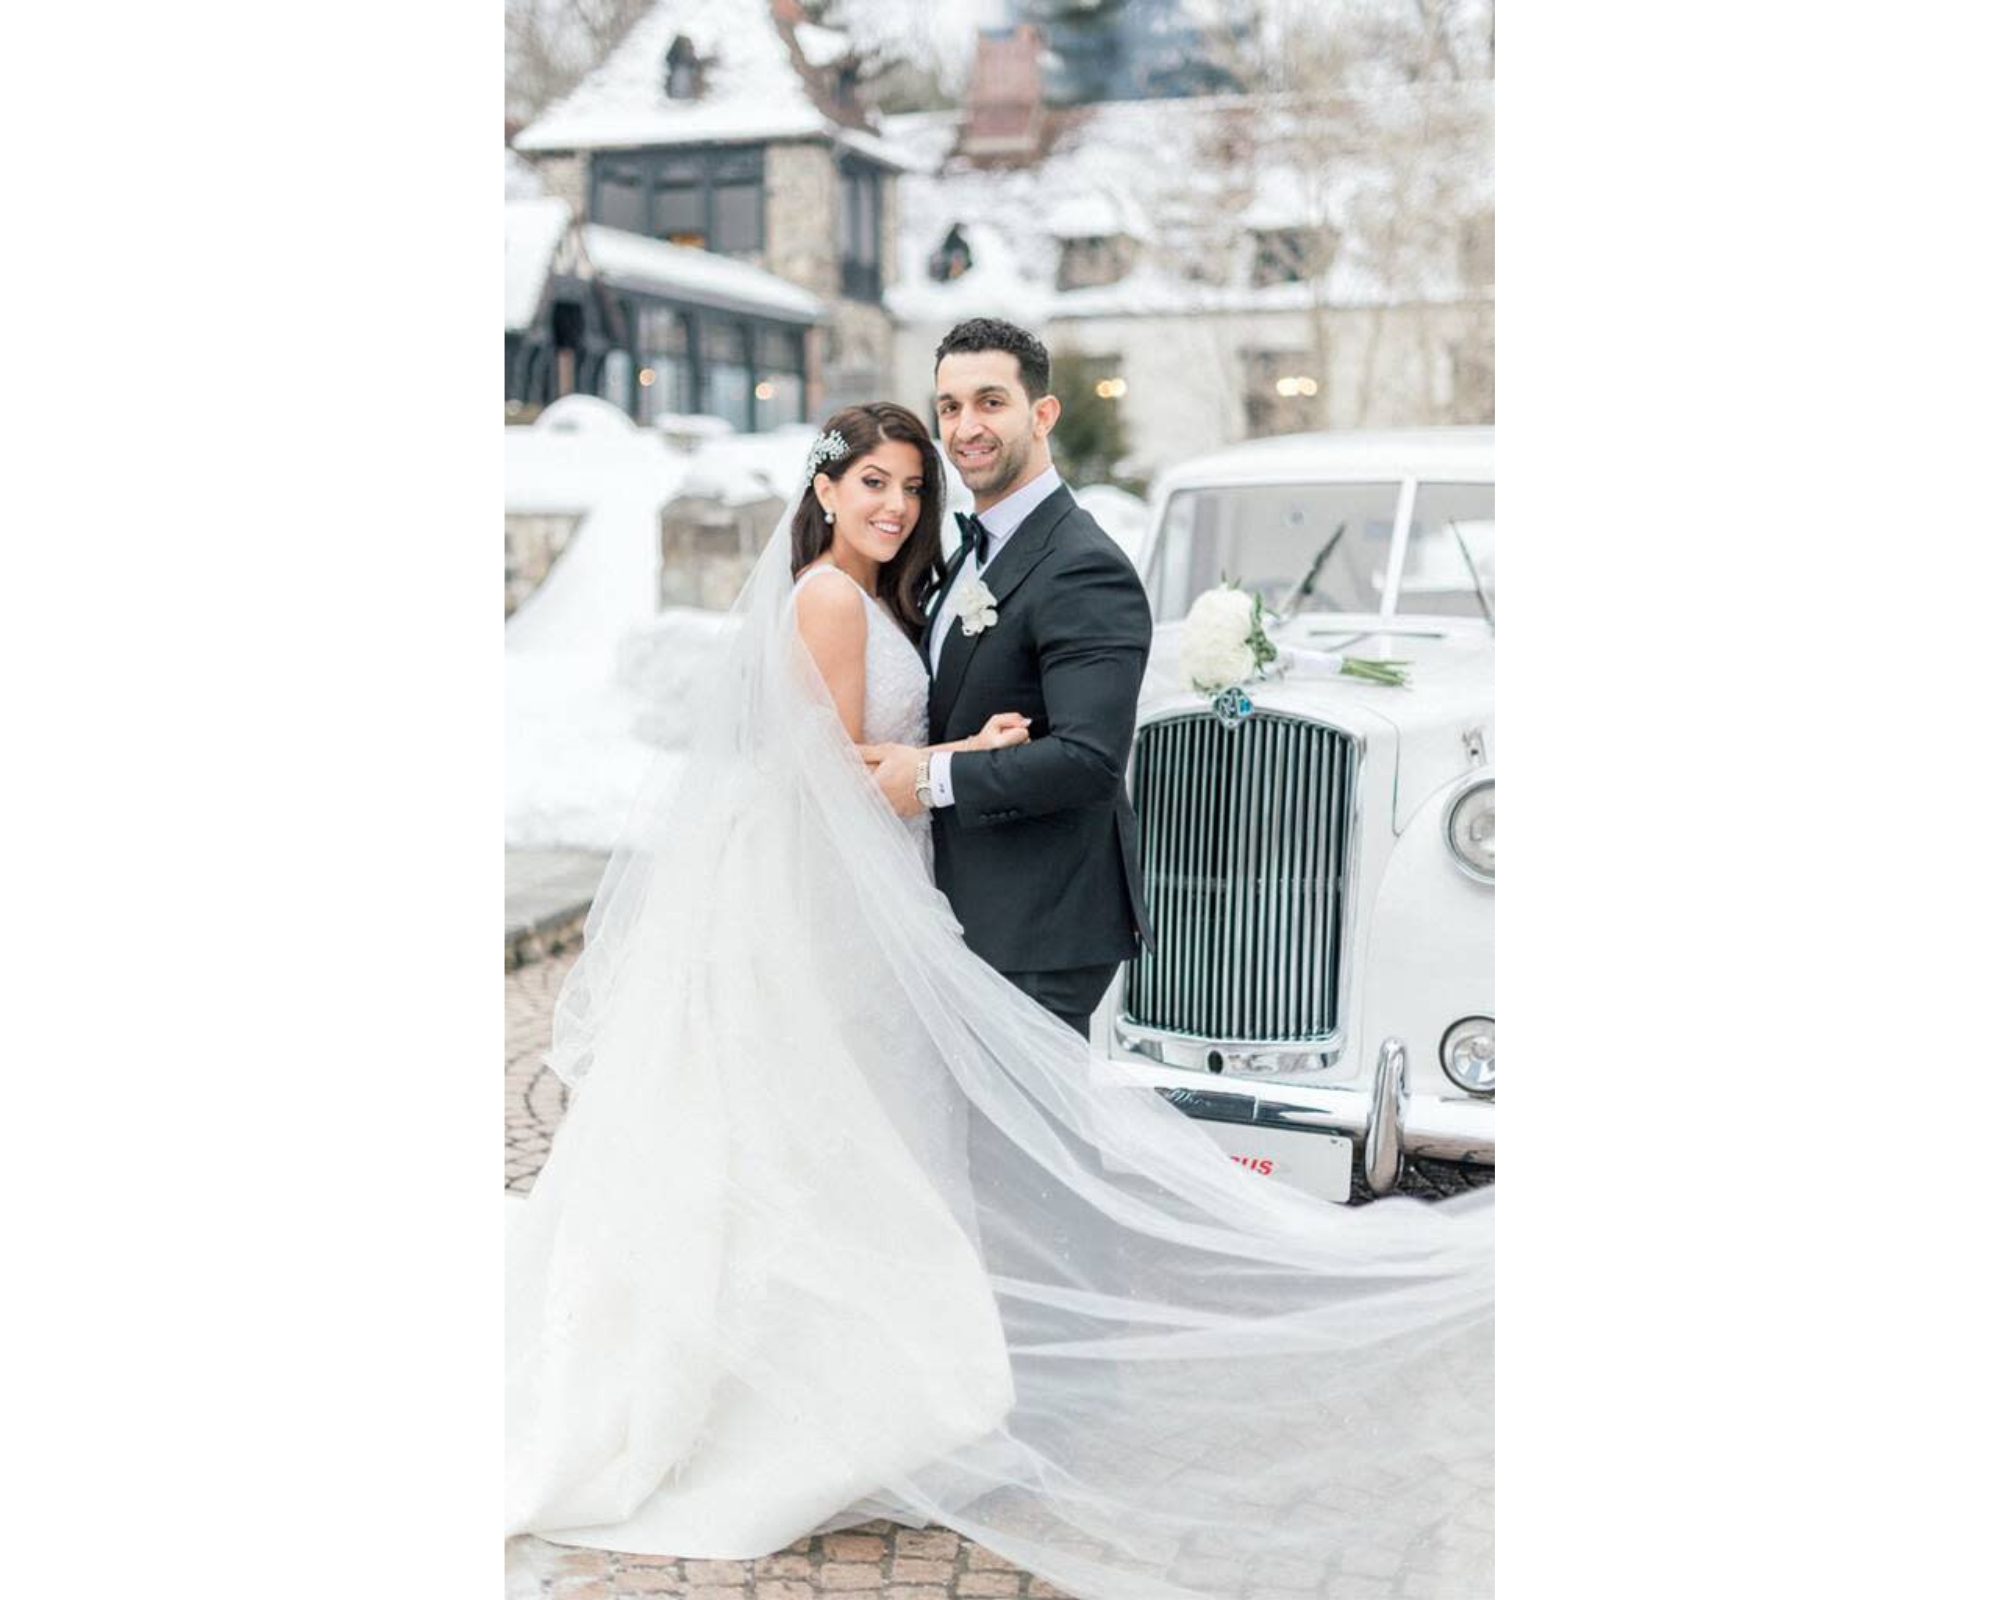 Our bride Victoria and her groom Teddy standing in front Rolls Royce on their snowy wedding day.